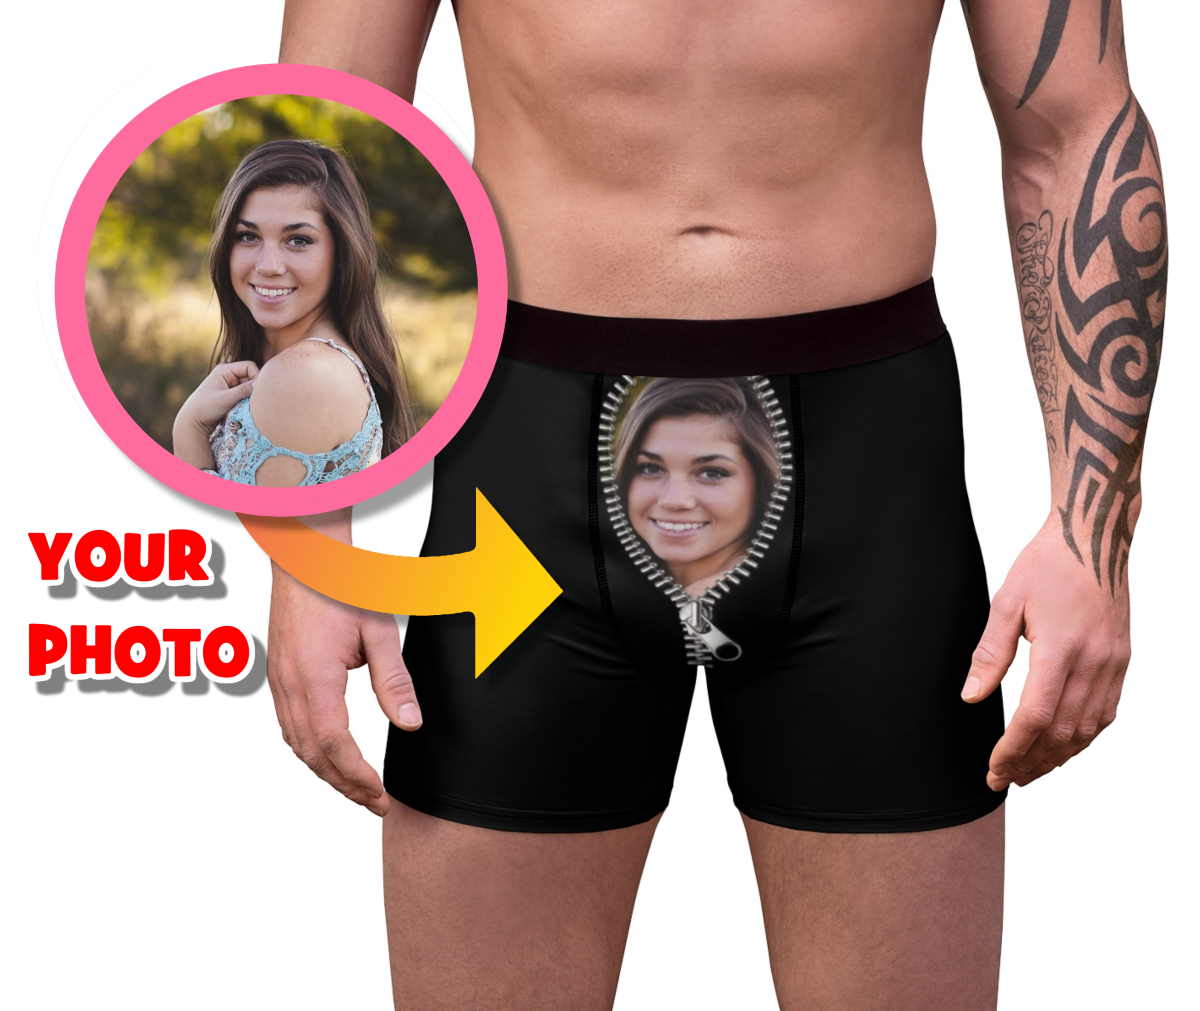 Your Face on Custom Men's Boxers with Zipper - Personalized